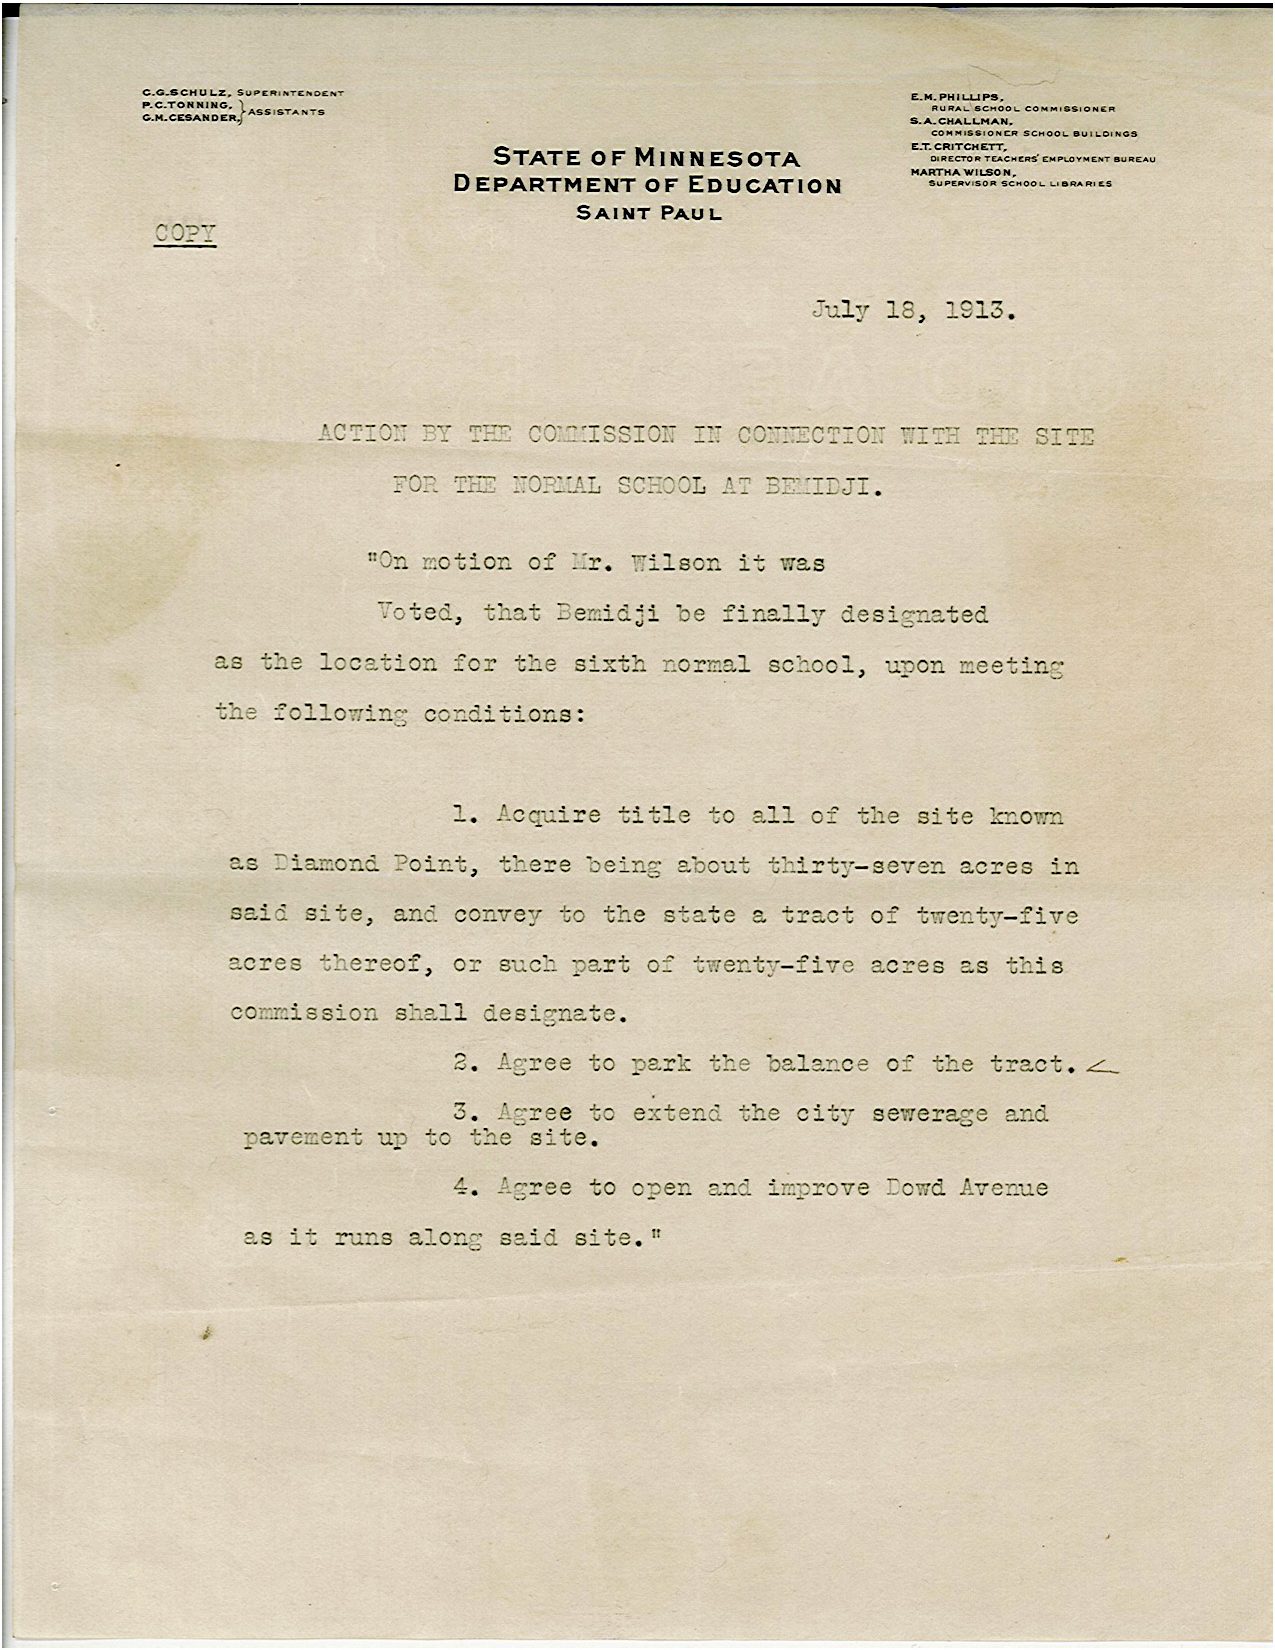 This memo on State of Minnesota Department of Education letterhead, marked “COPY” and dated July 18, 1913, officially established Bemidji as the site of Minnesota’s sixth Normal School.